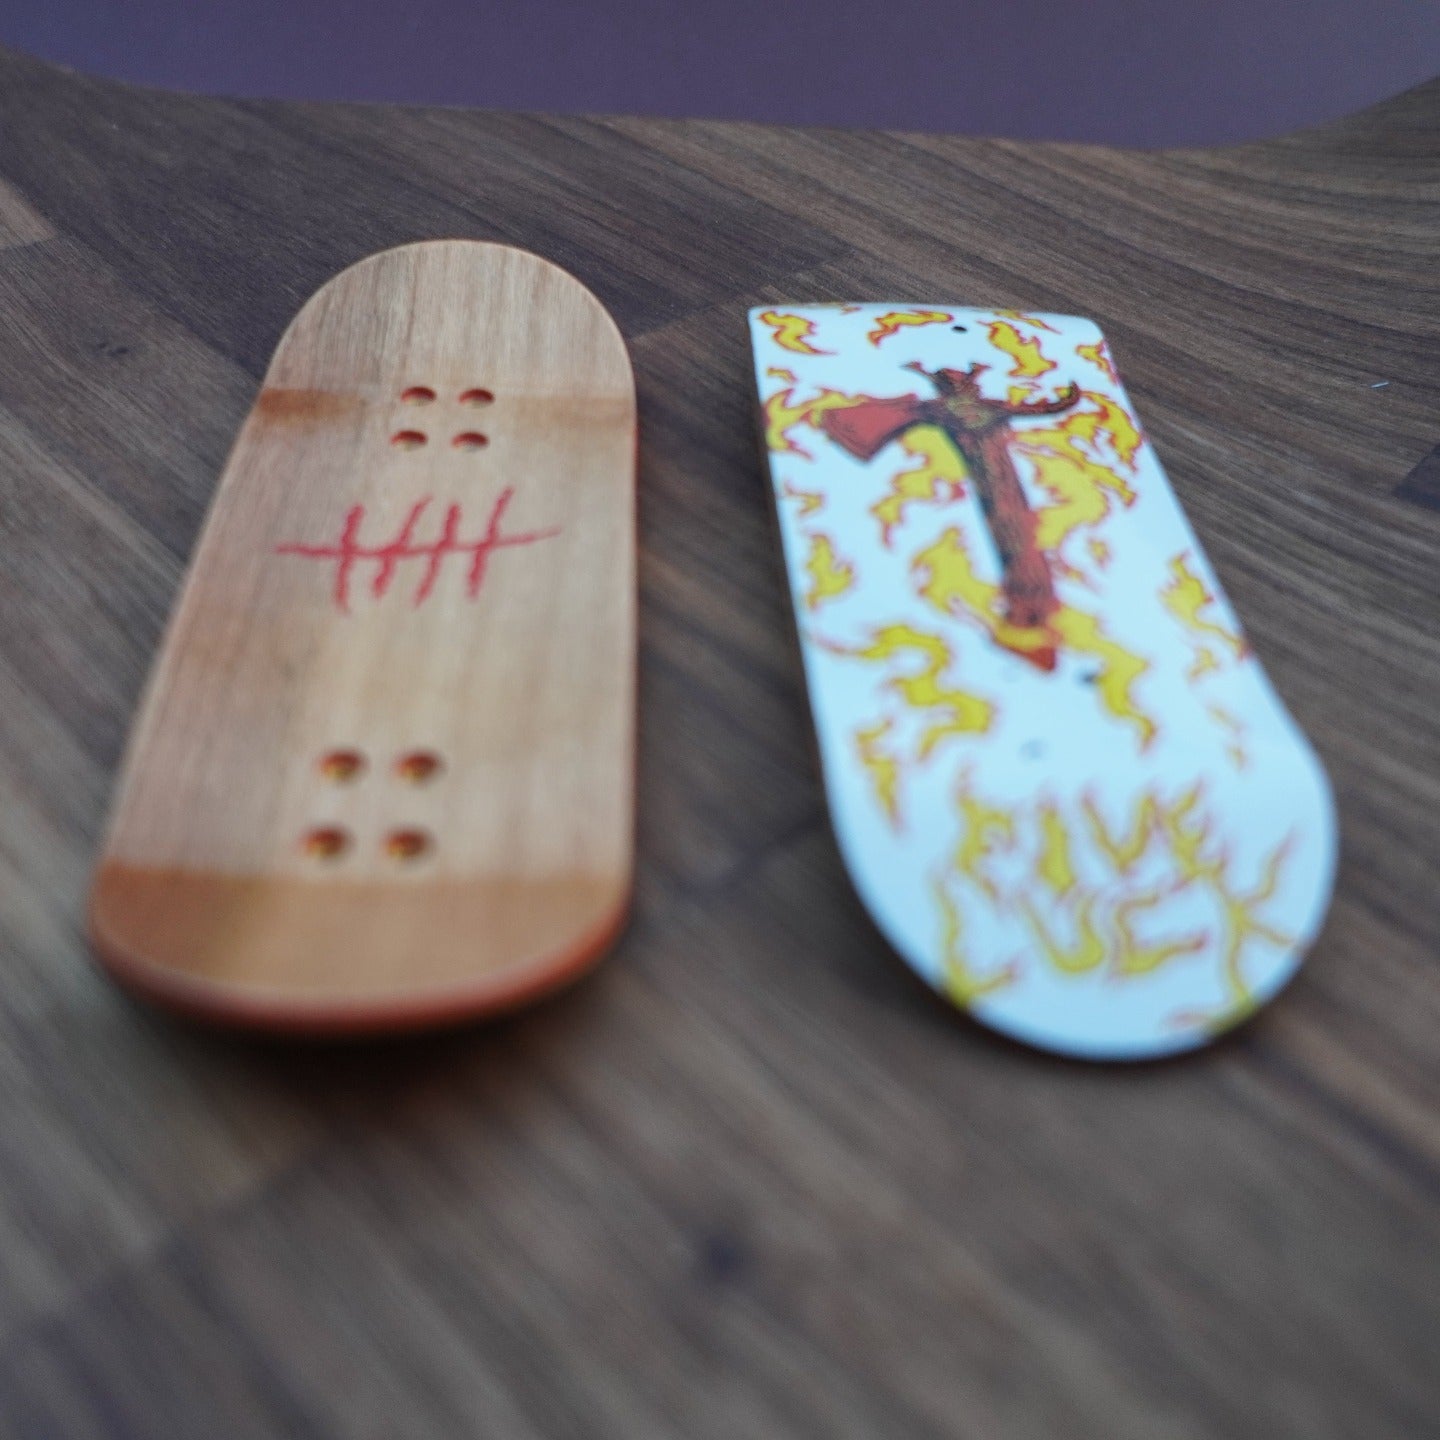 Five Luck Fingerboards - Sacred Axes 핑거보드 데크